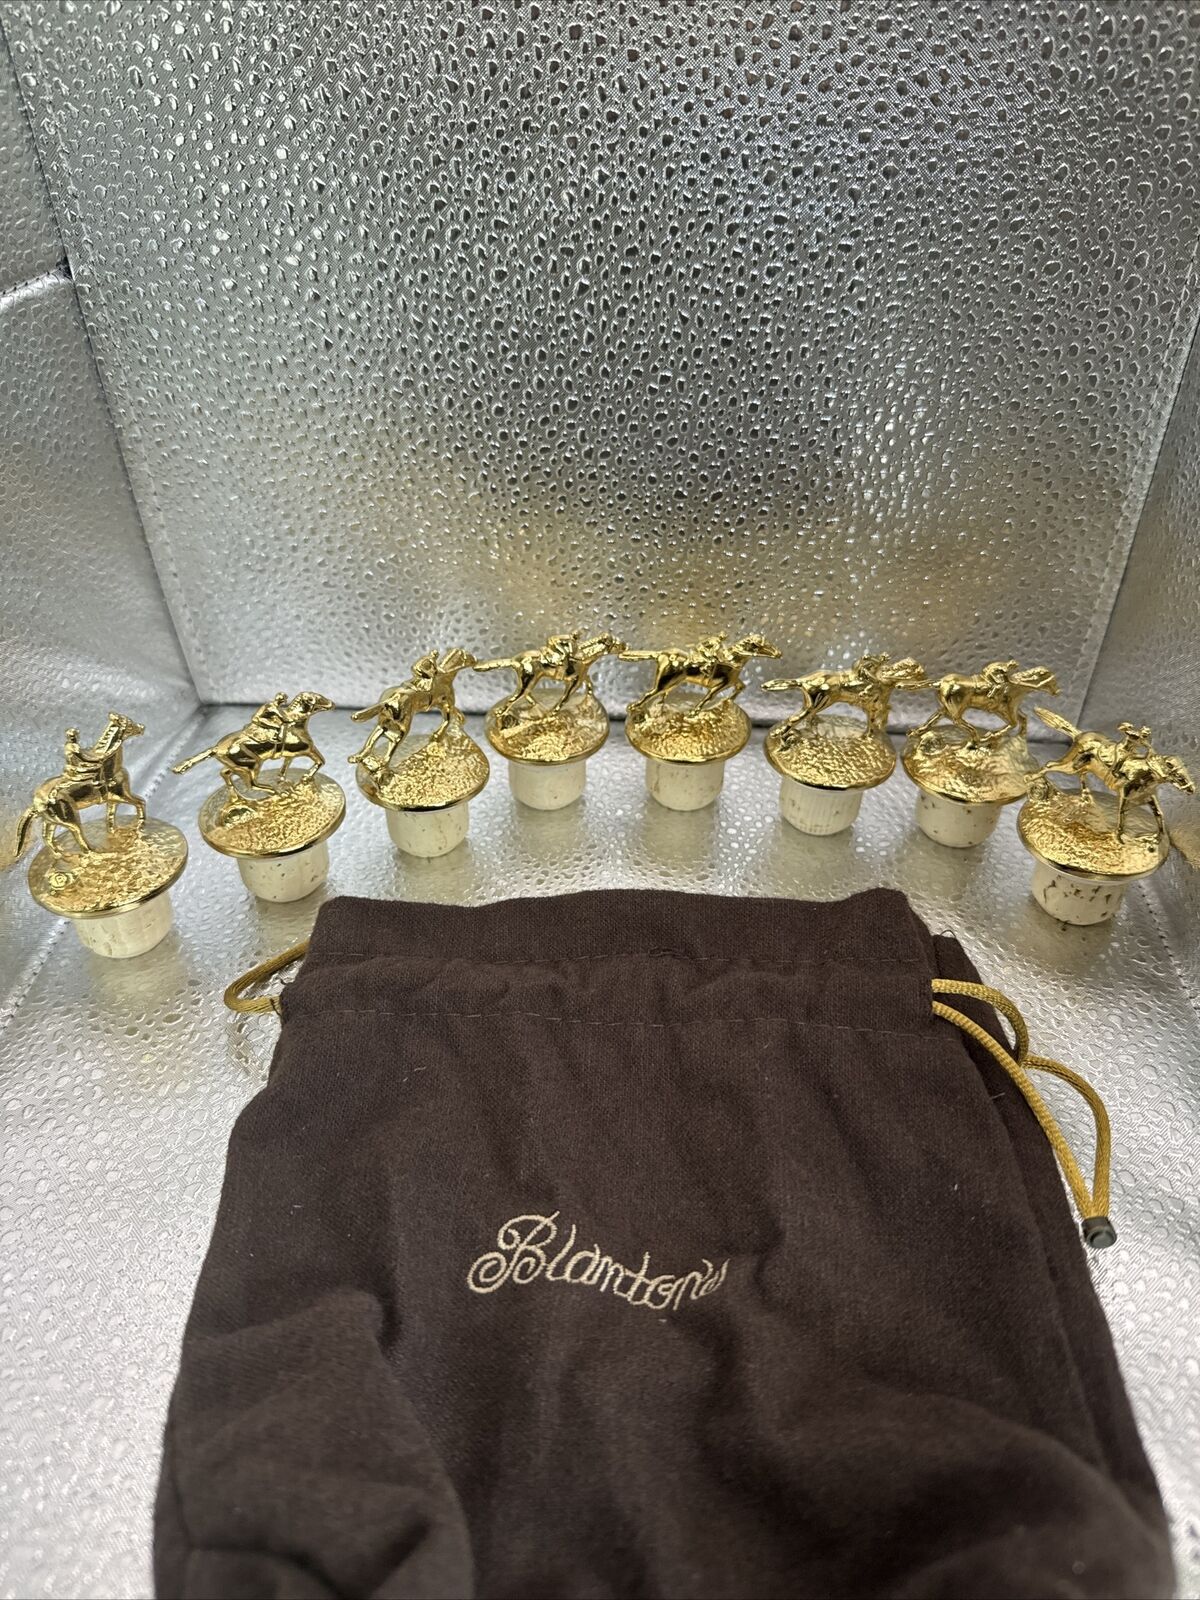 Limited Edition - Blanton's Bourbon Complete Set of 8 Gold Stoppers